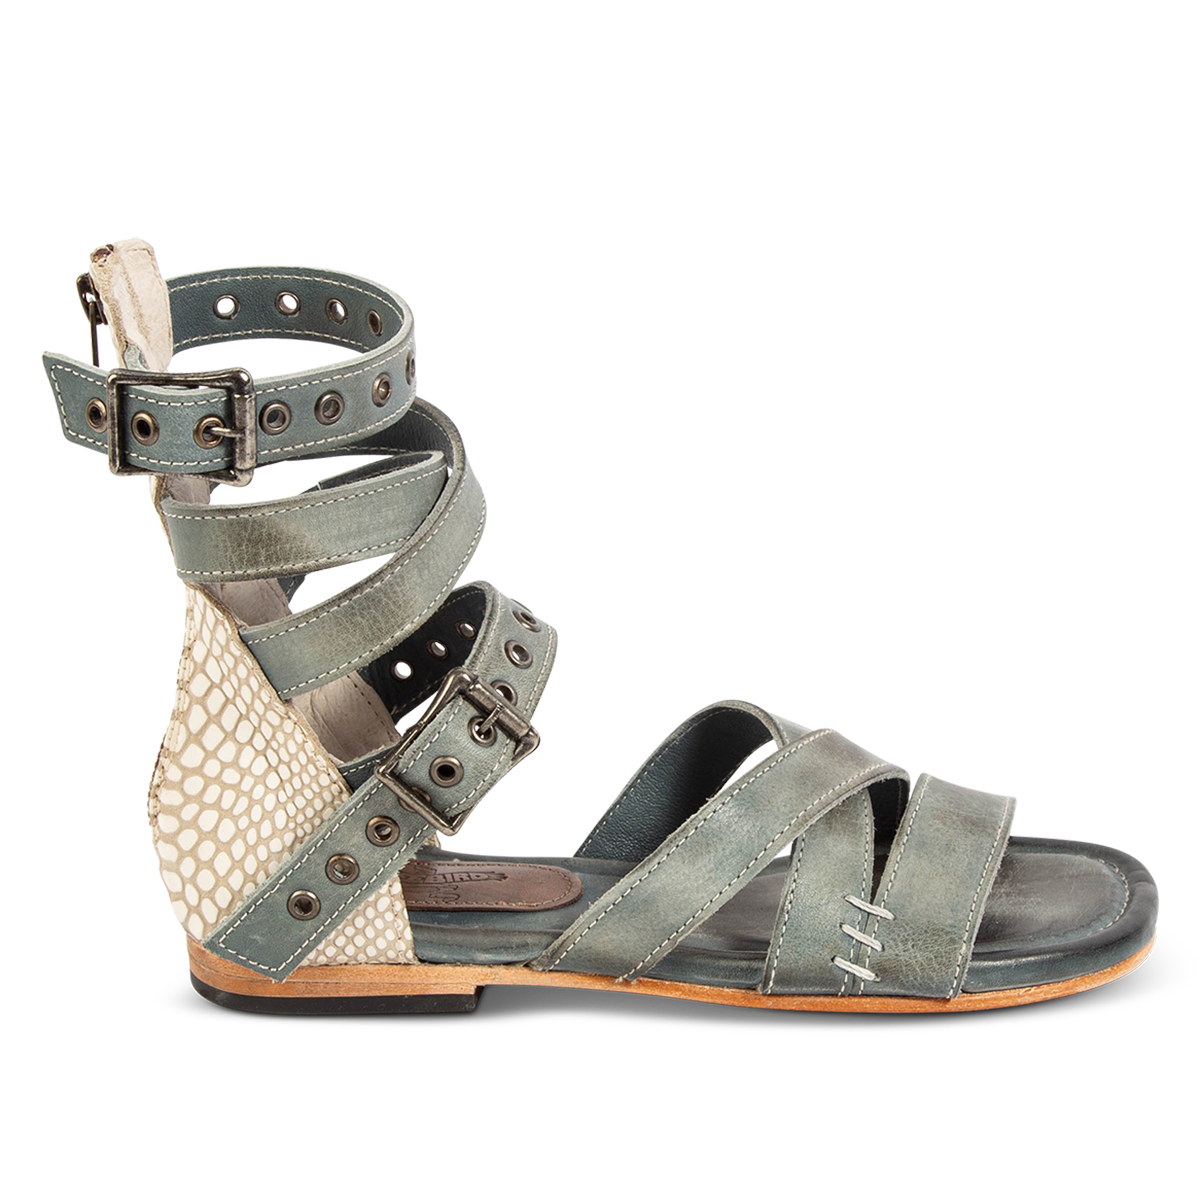 FREEBIRD women's Sydney blue multi leather gladiator sandal with adjustable leather straps and an abstract back panel